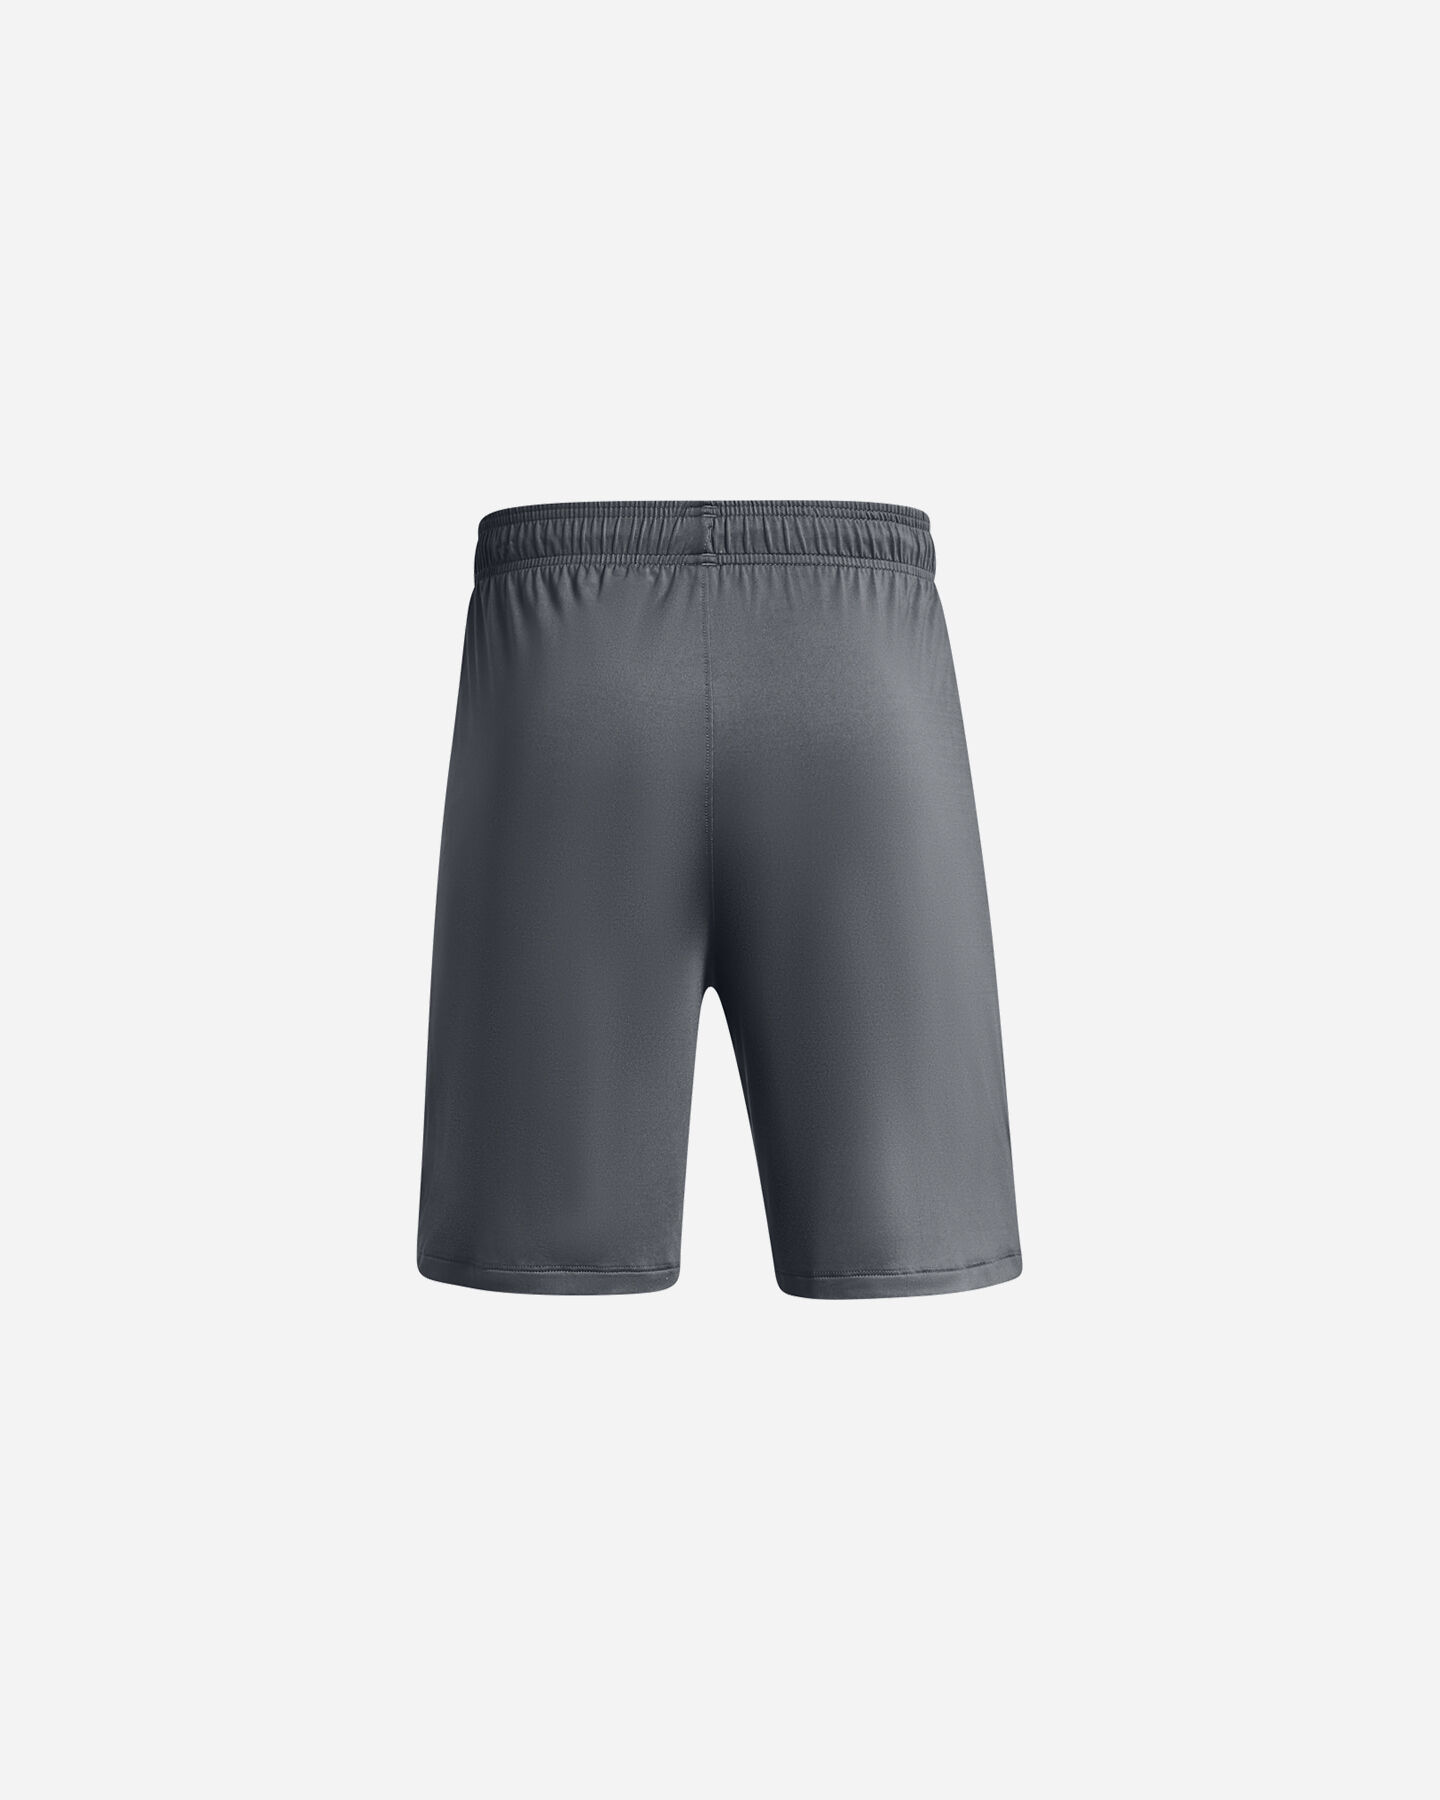  Pantalone training UNDER ARMOUR TECH VENT M S5528631|0012|XS scatto 1